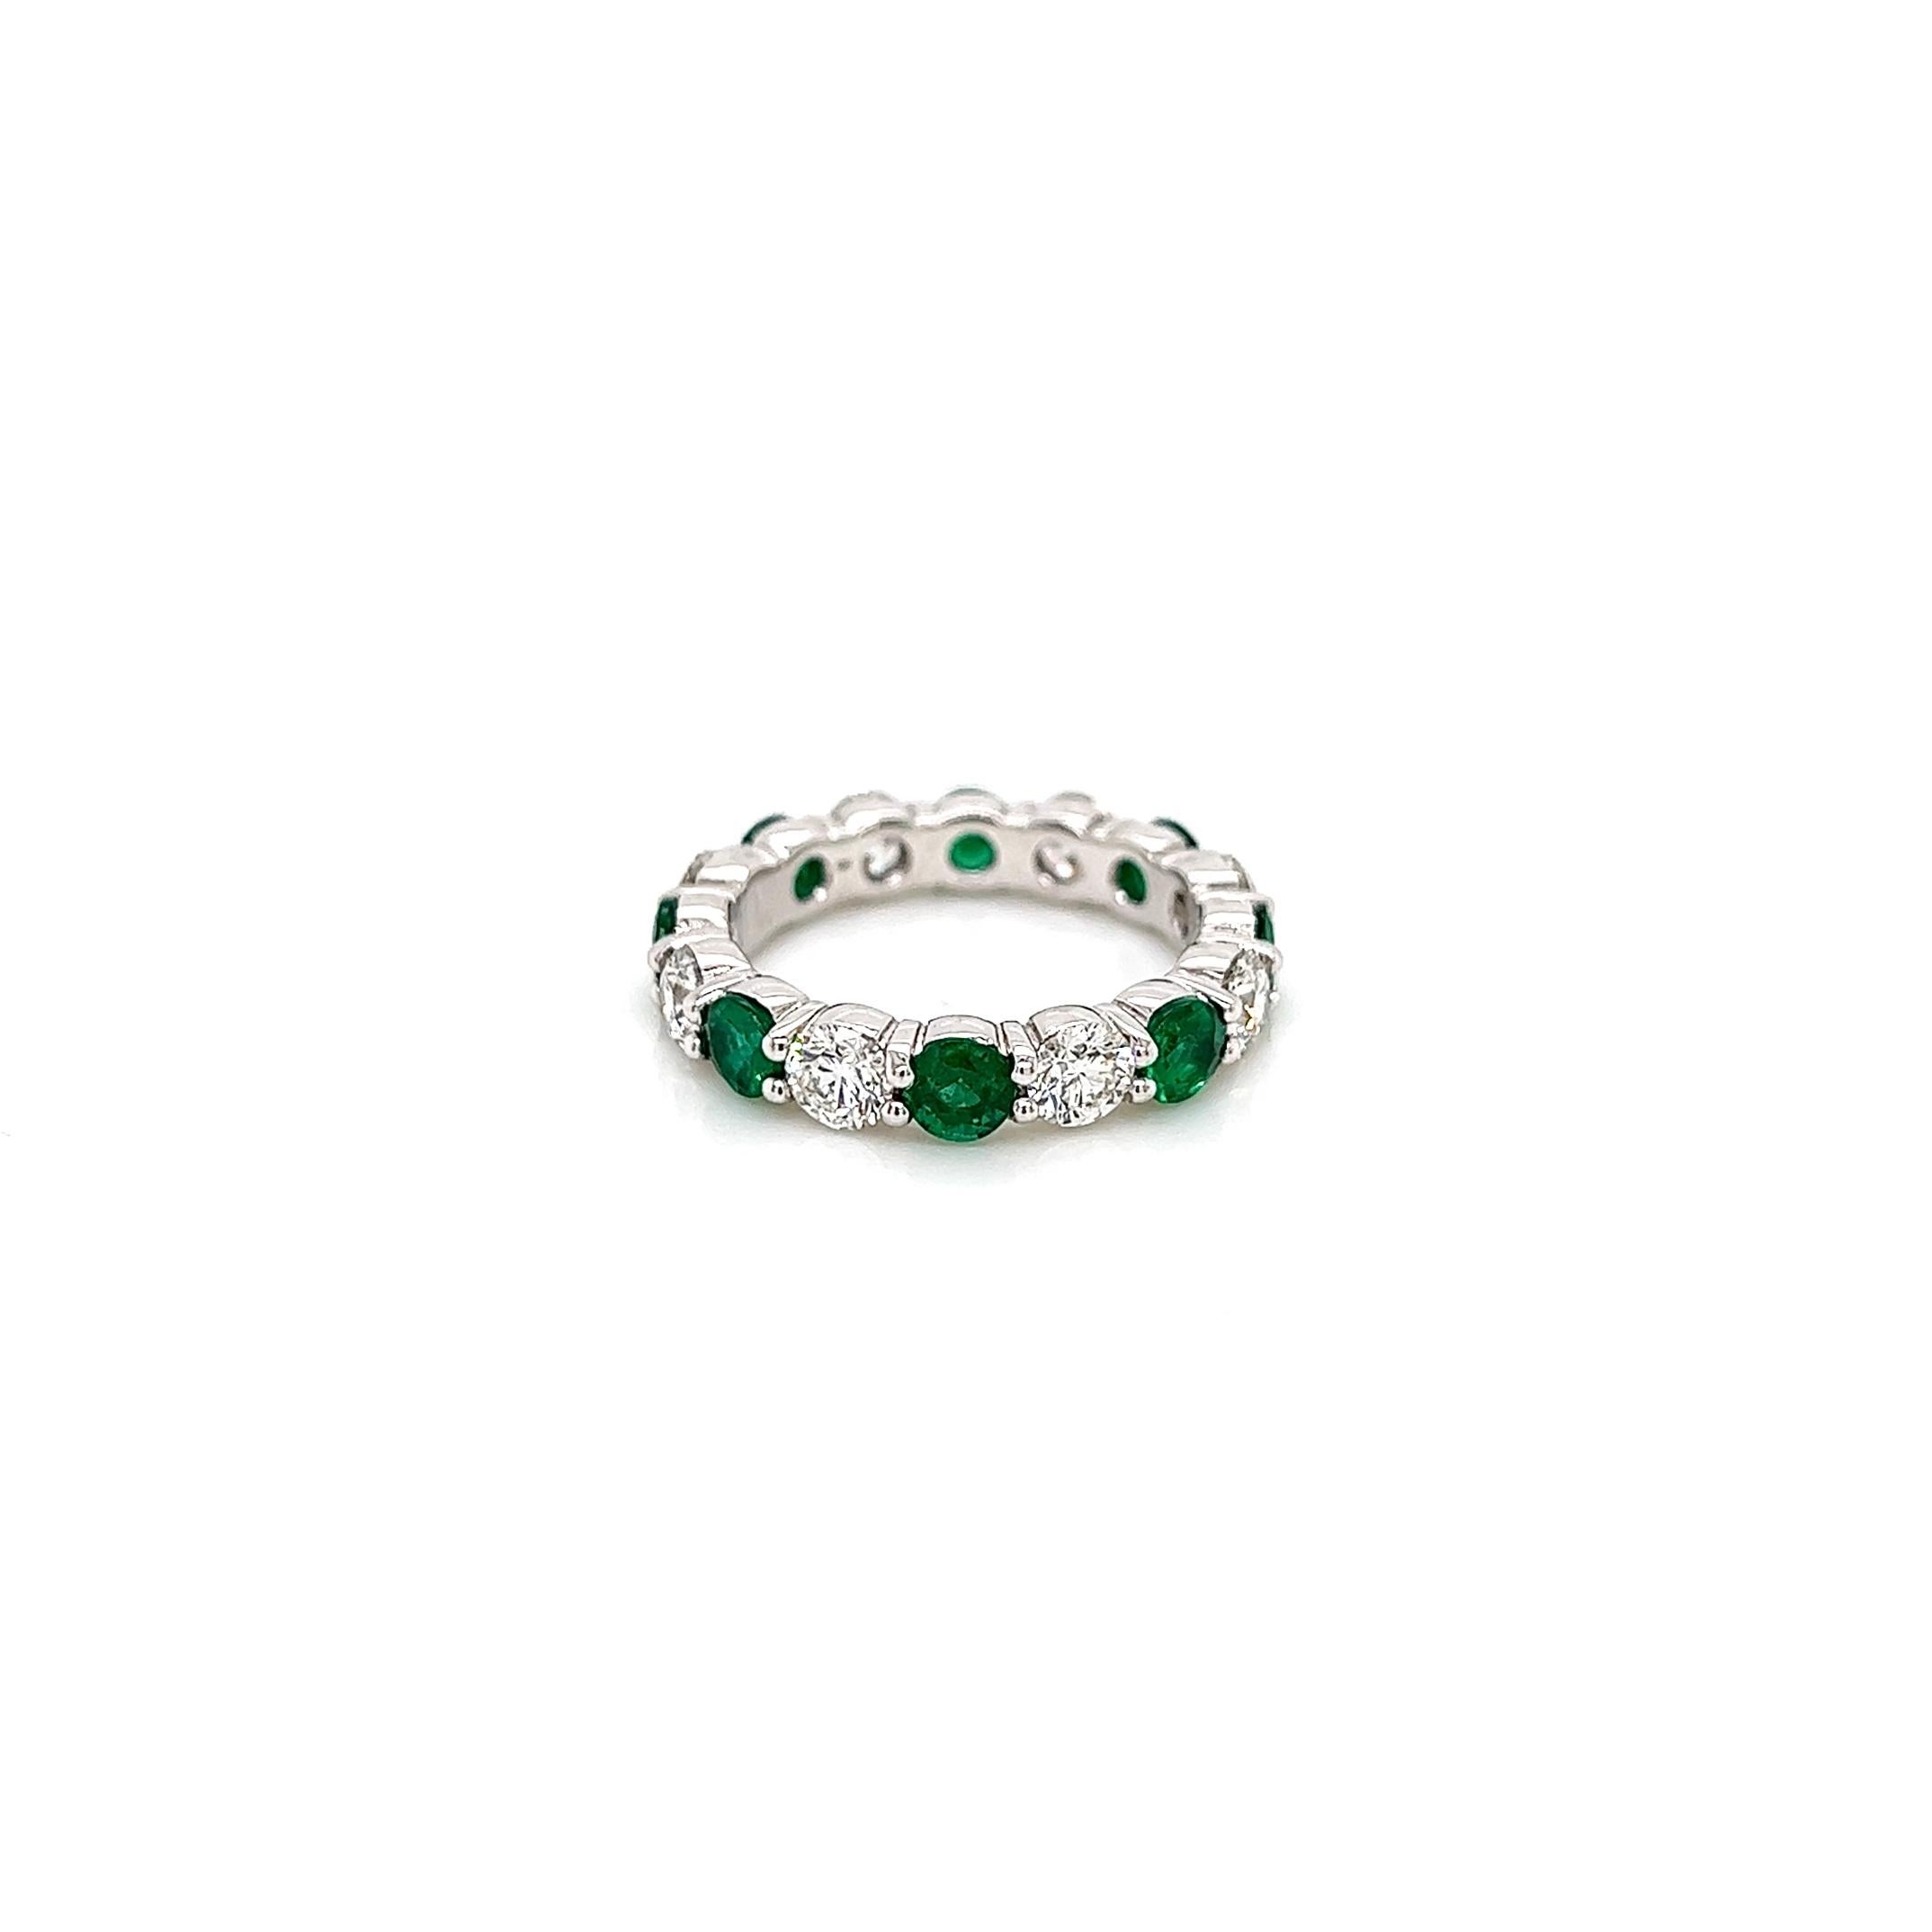 3.36 Total Carat Green Emerald and Diamond Ladies Ring

Highly Polished 1.86 Carat Diamond Eternity Band with Green Emerald Gemstone Carat Weight of 1.50 CT.

Specifications:
-Metal Type: 18K White Gold
-1.50 Carat Round Cut Columbian Green